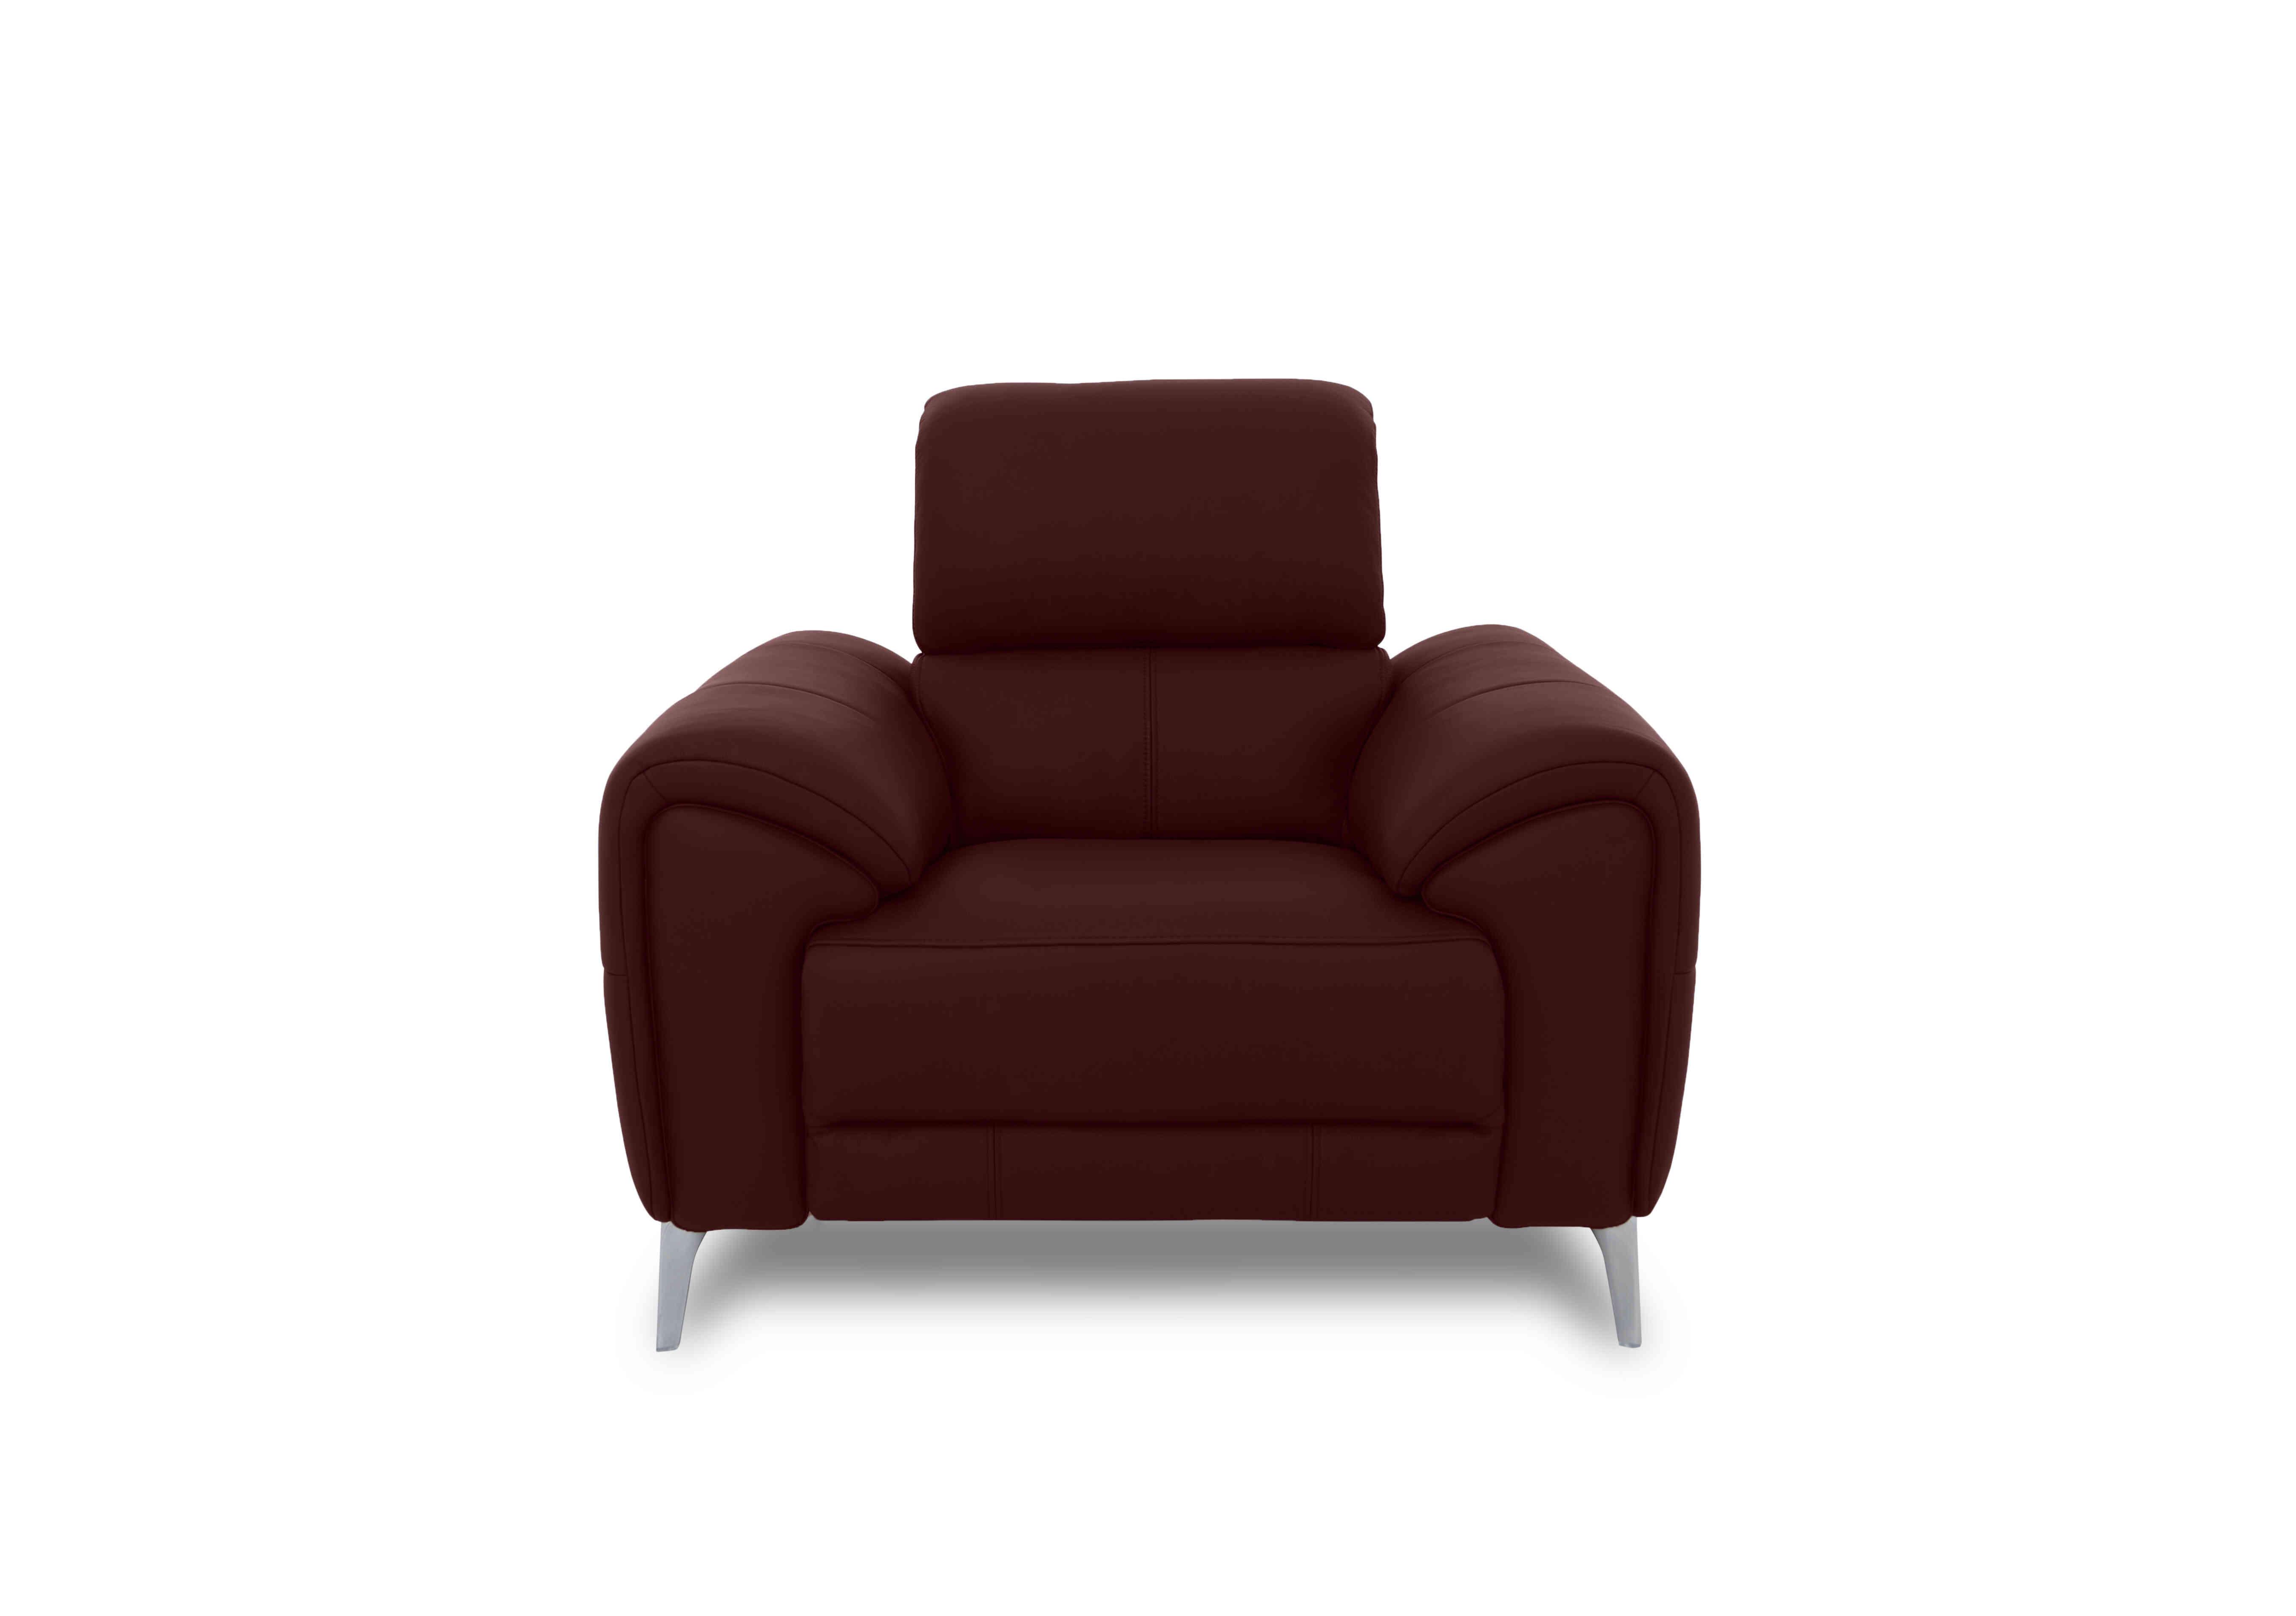 Vino Leather Power Recliner Chair with Power Headrest and Heated Seat in Cat-60/15 Ruby on Furniture Village